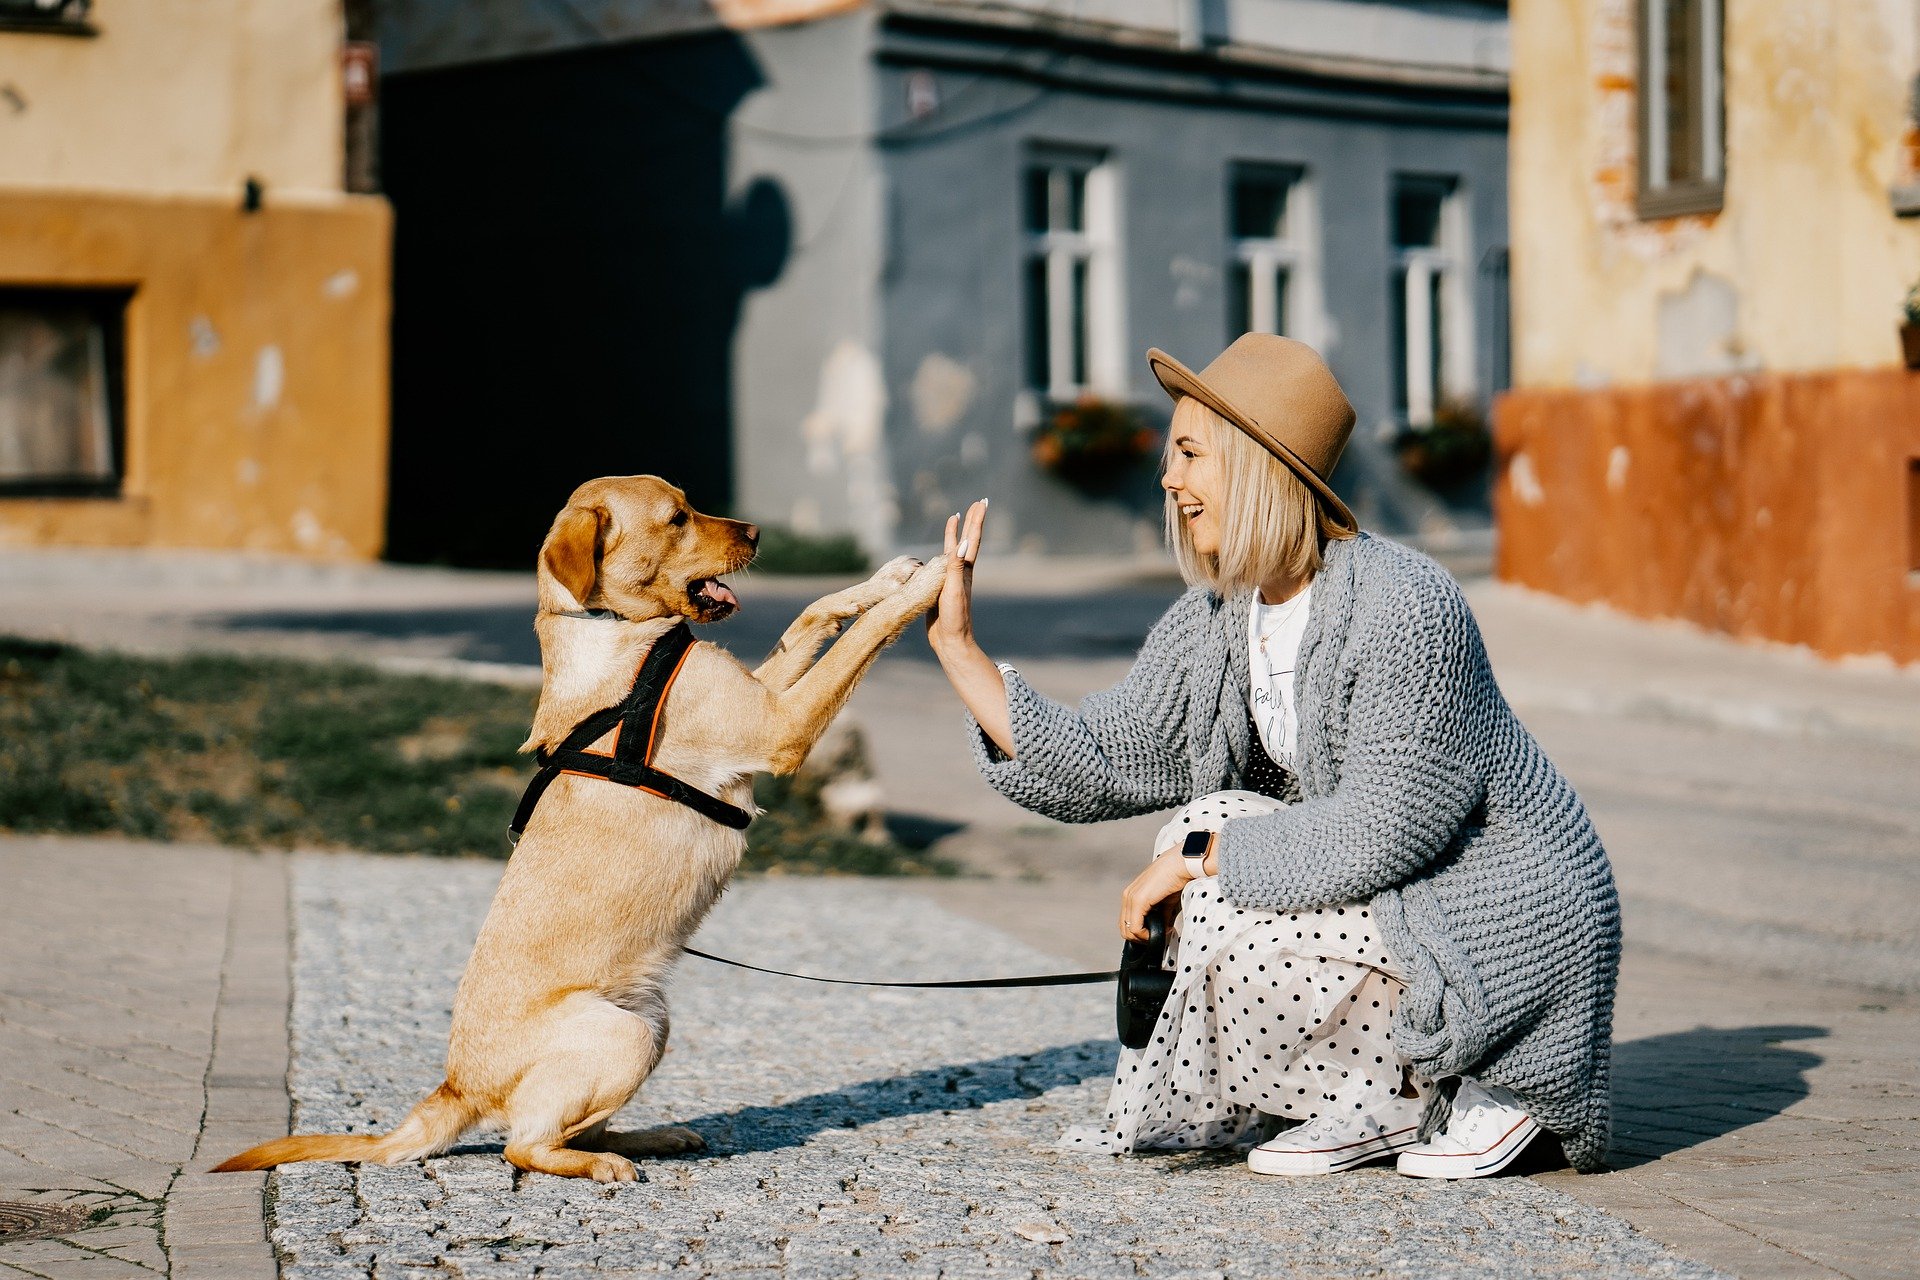 Playing with your pets is good for your mental health